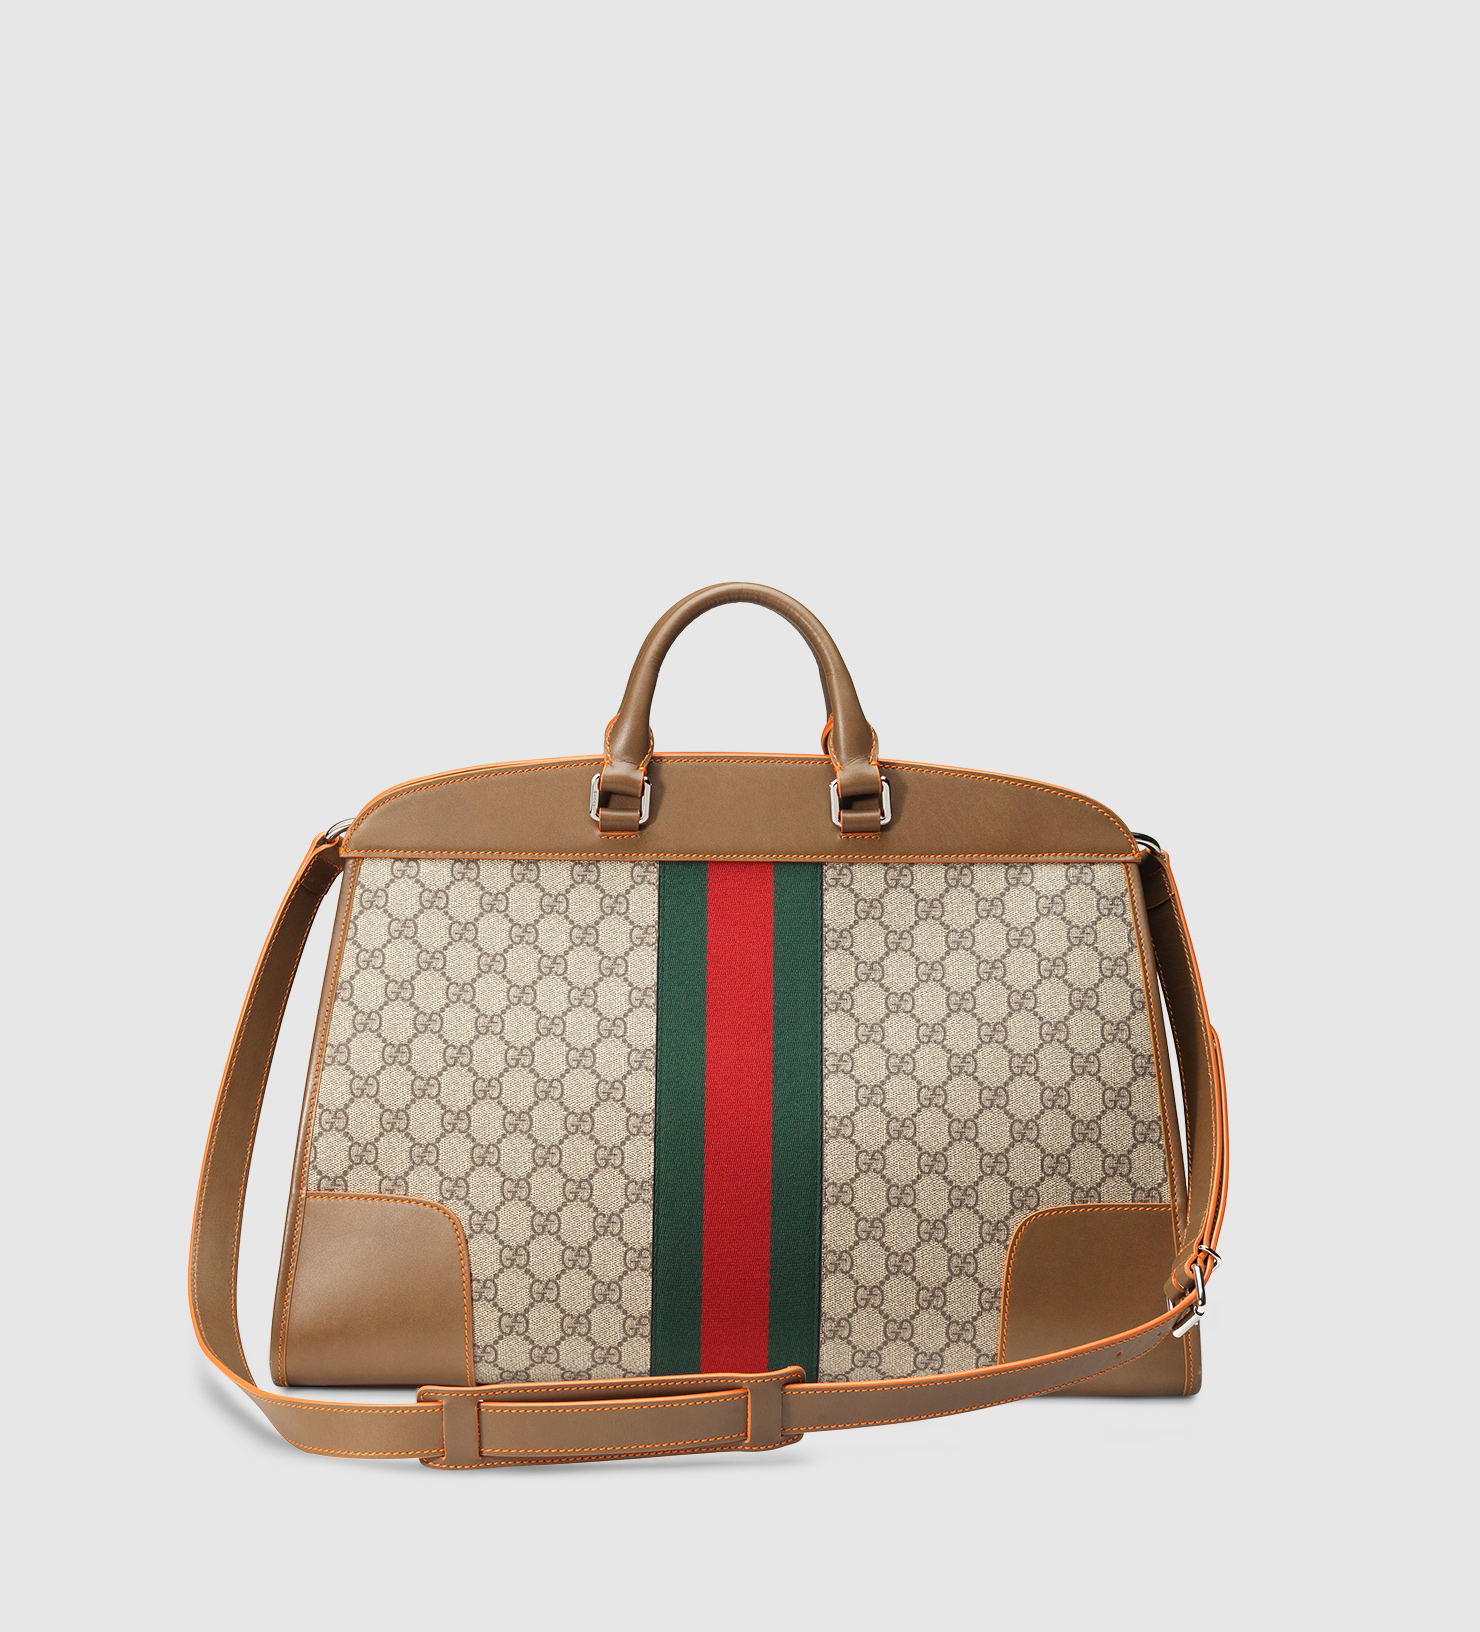 Lyst - Gucci Gg Supreme Canvas Duffle in Brown for Men